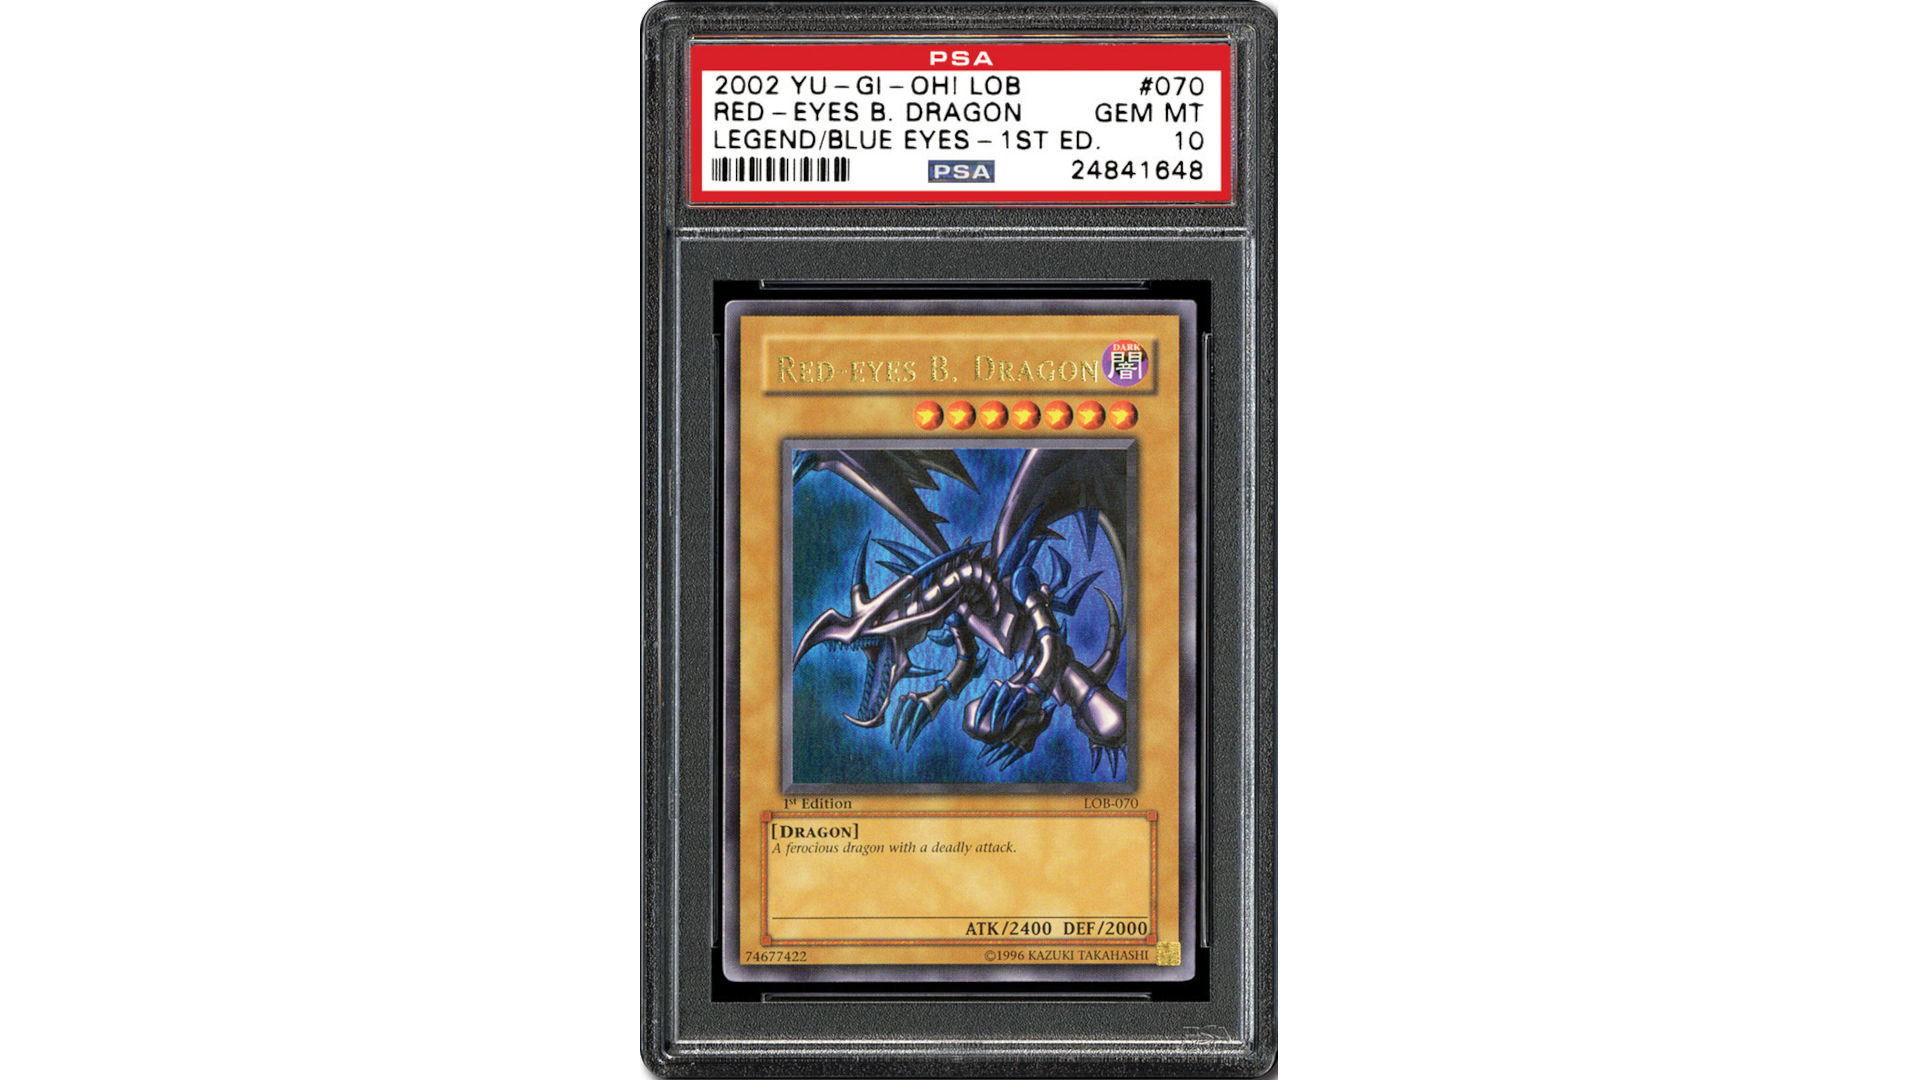 Top 10 Most Expensive & Most Valuable Yu-Gi-Oh! Cards - November 2020 